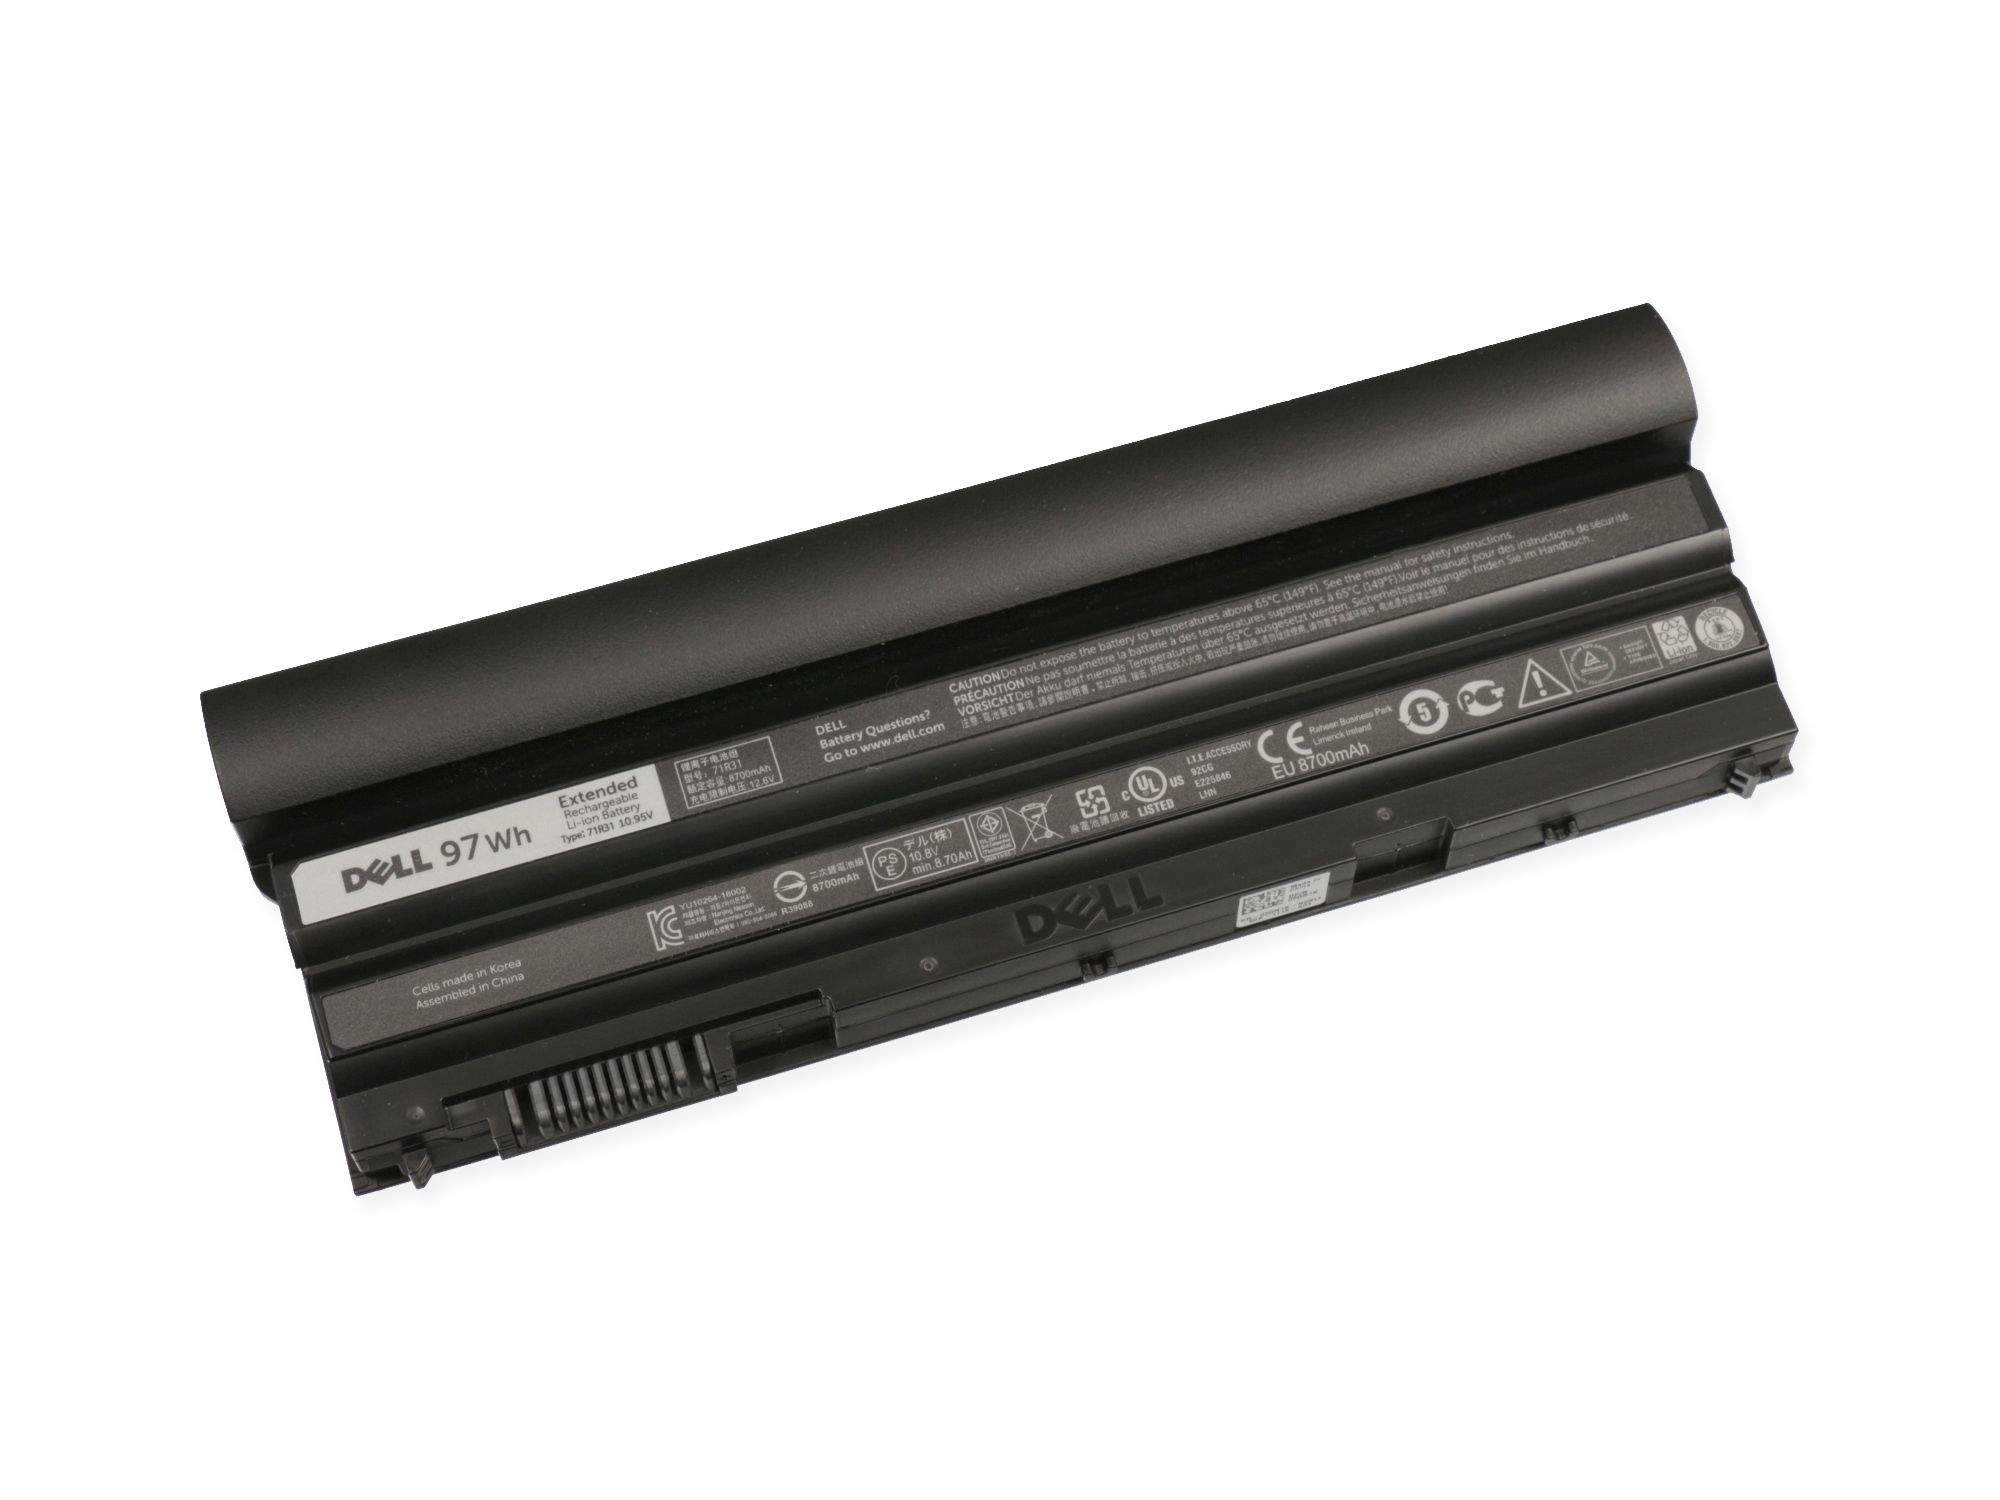 DELL Battery 97 Whr 9 Cells